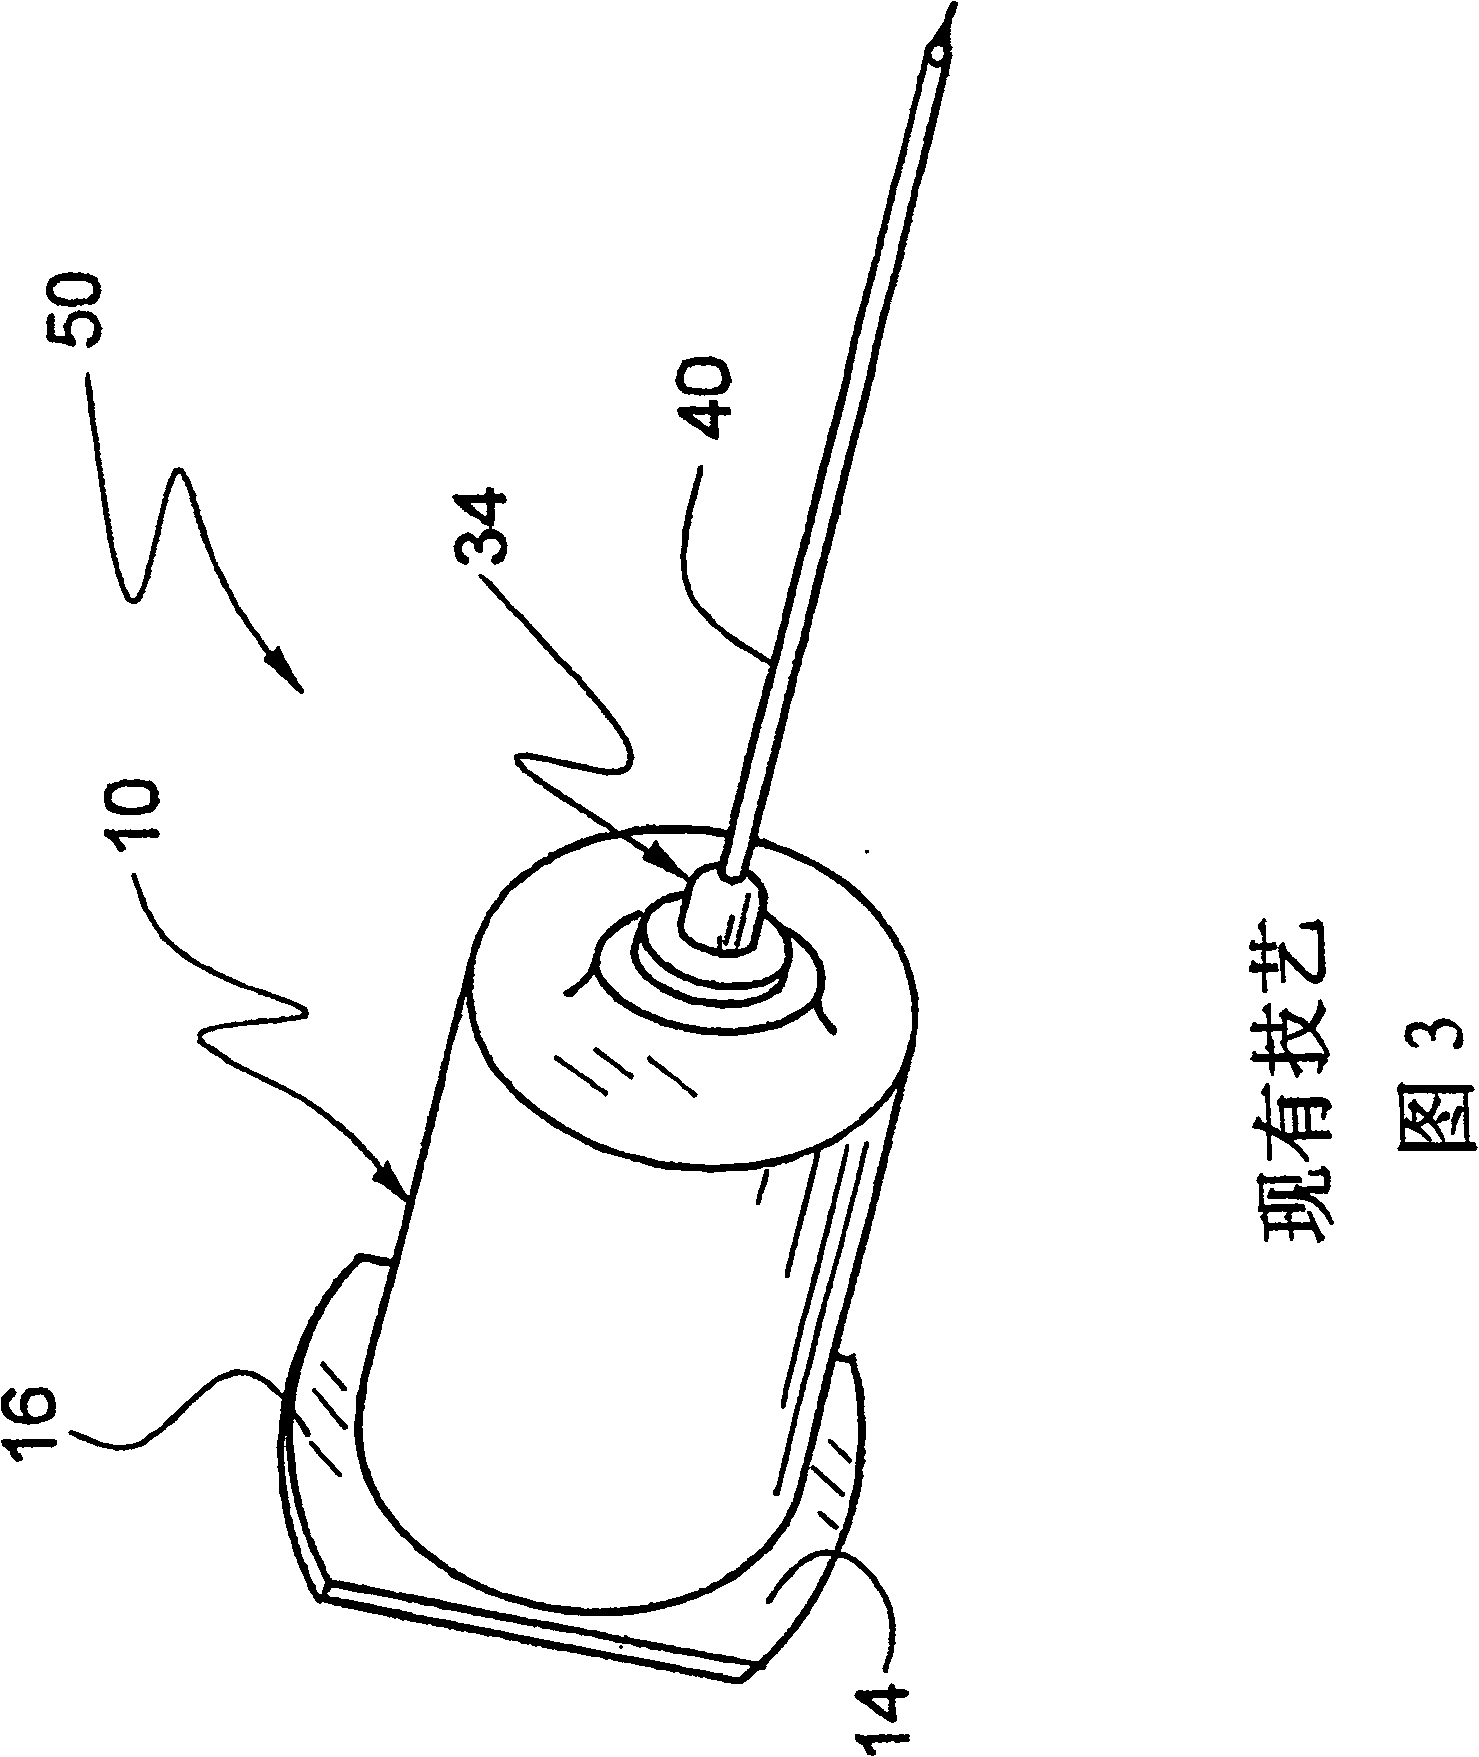 Medical needle safety apparatus and methods